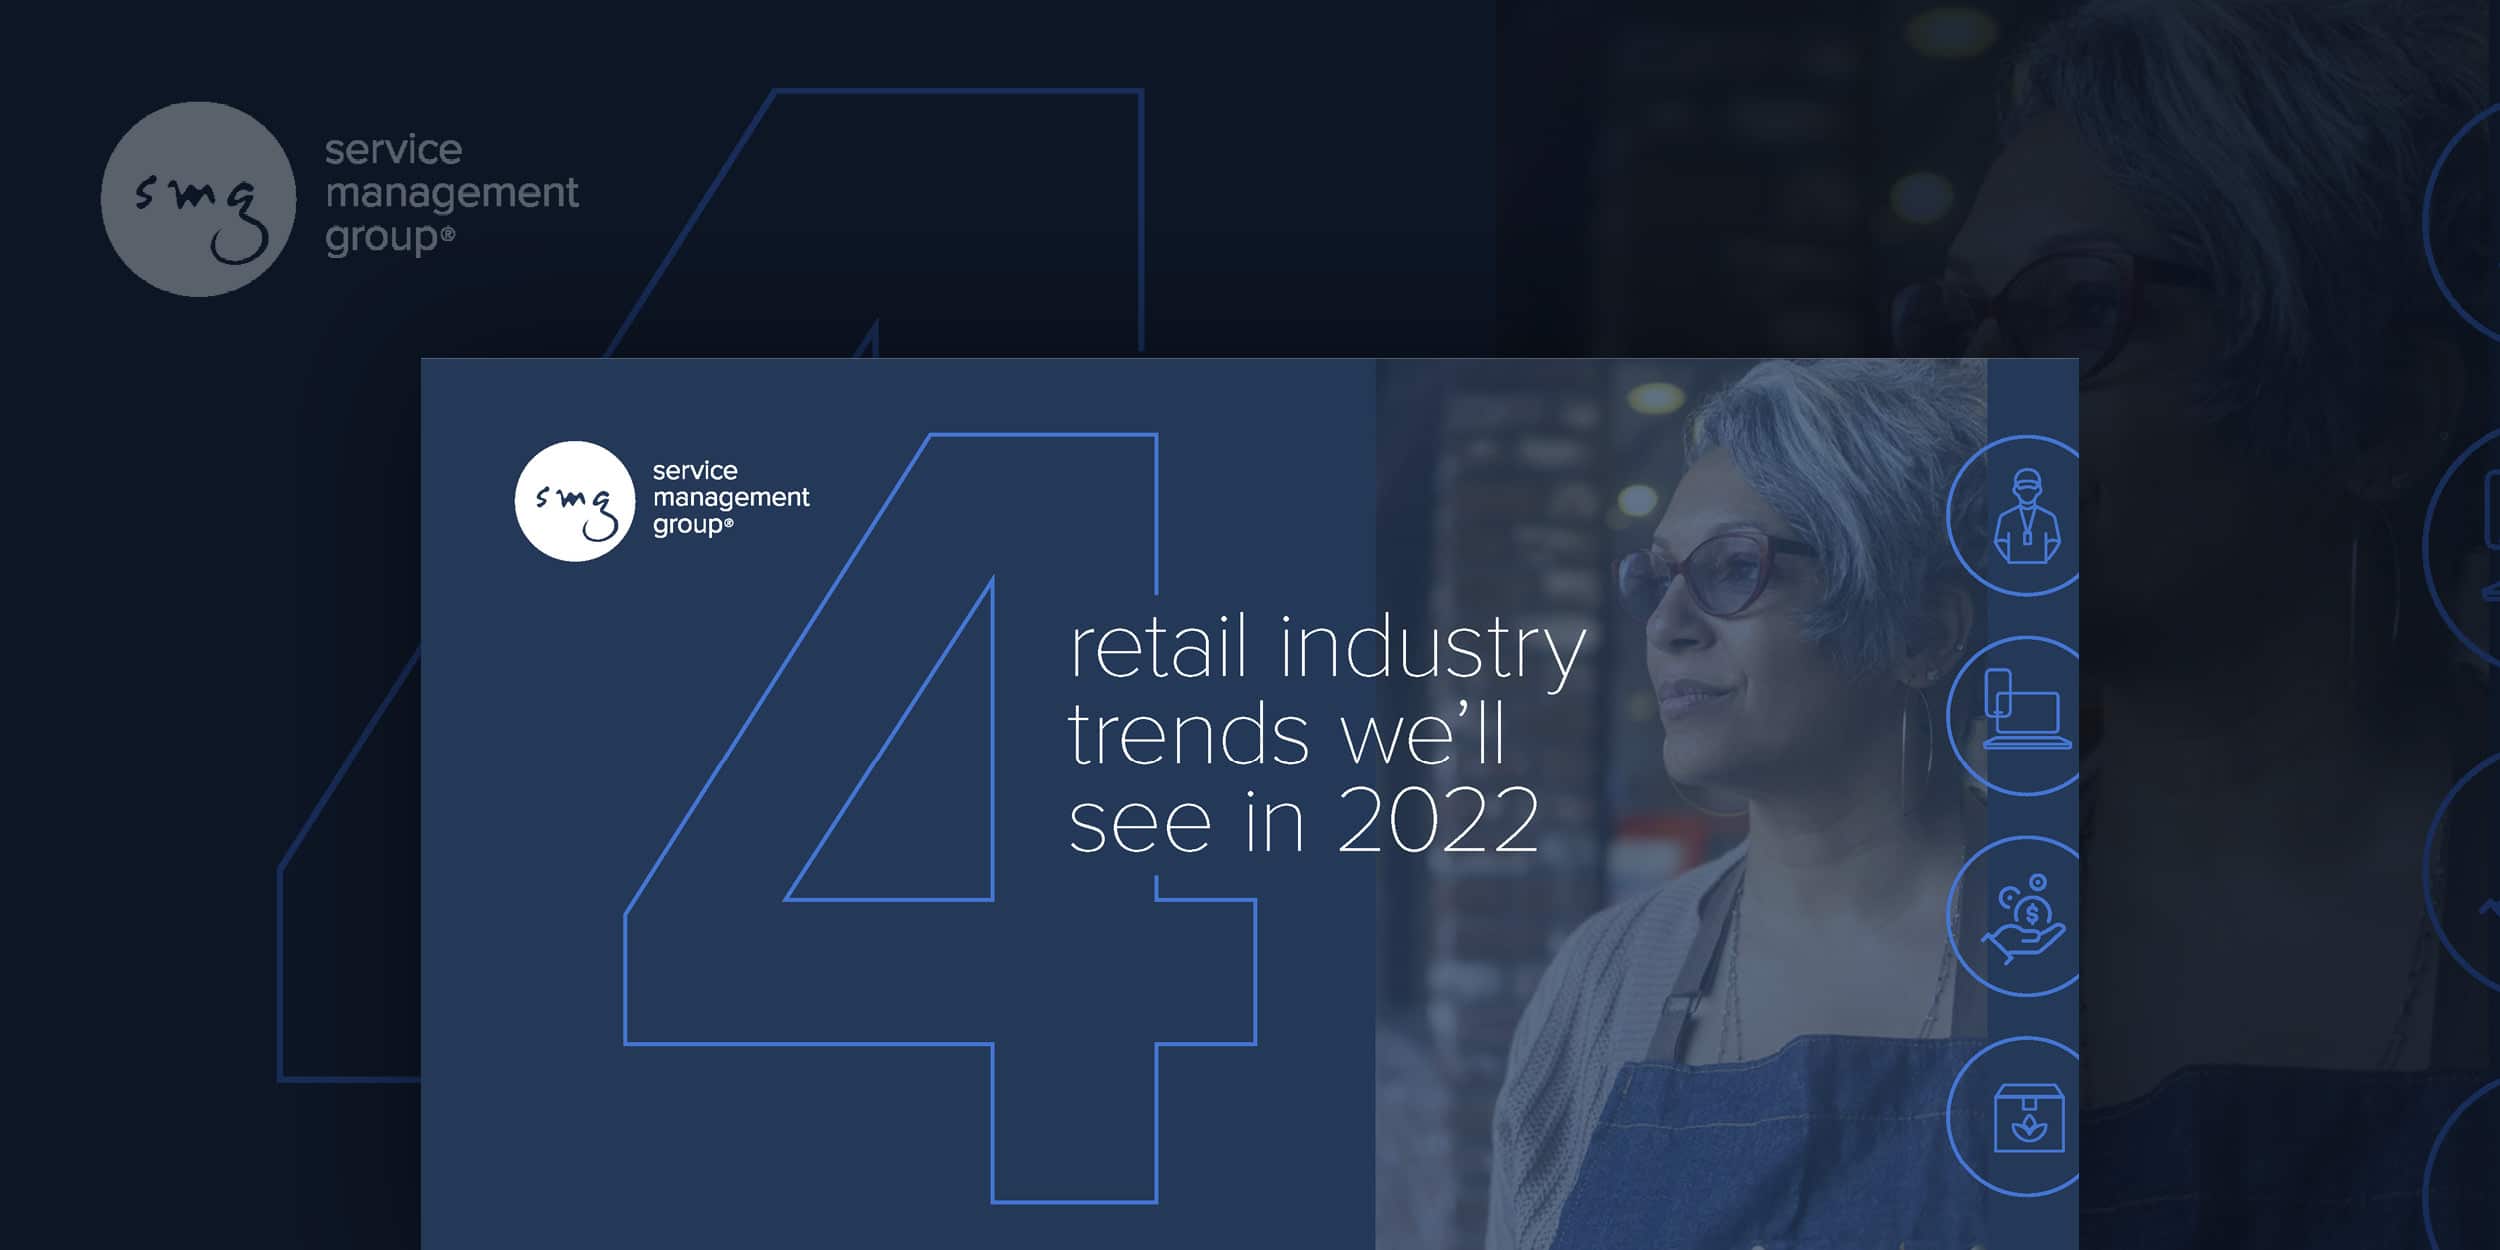 4 retail industry trends we’ll see in 2022